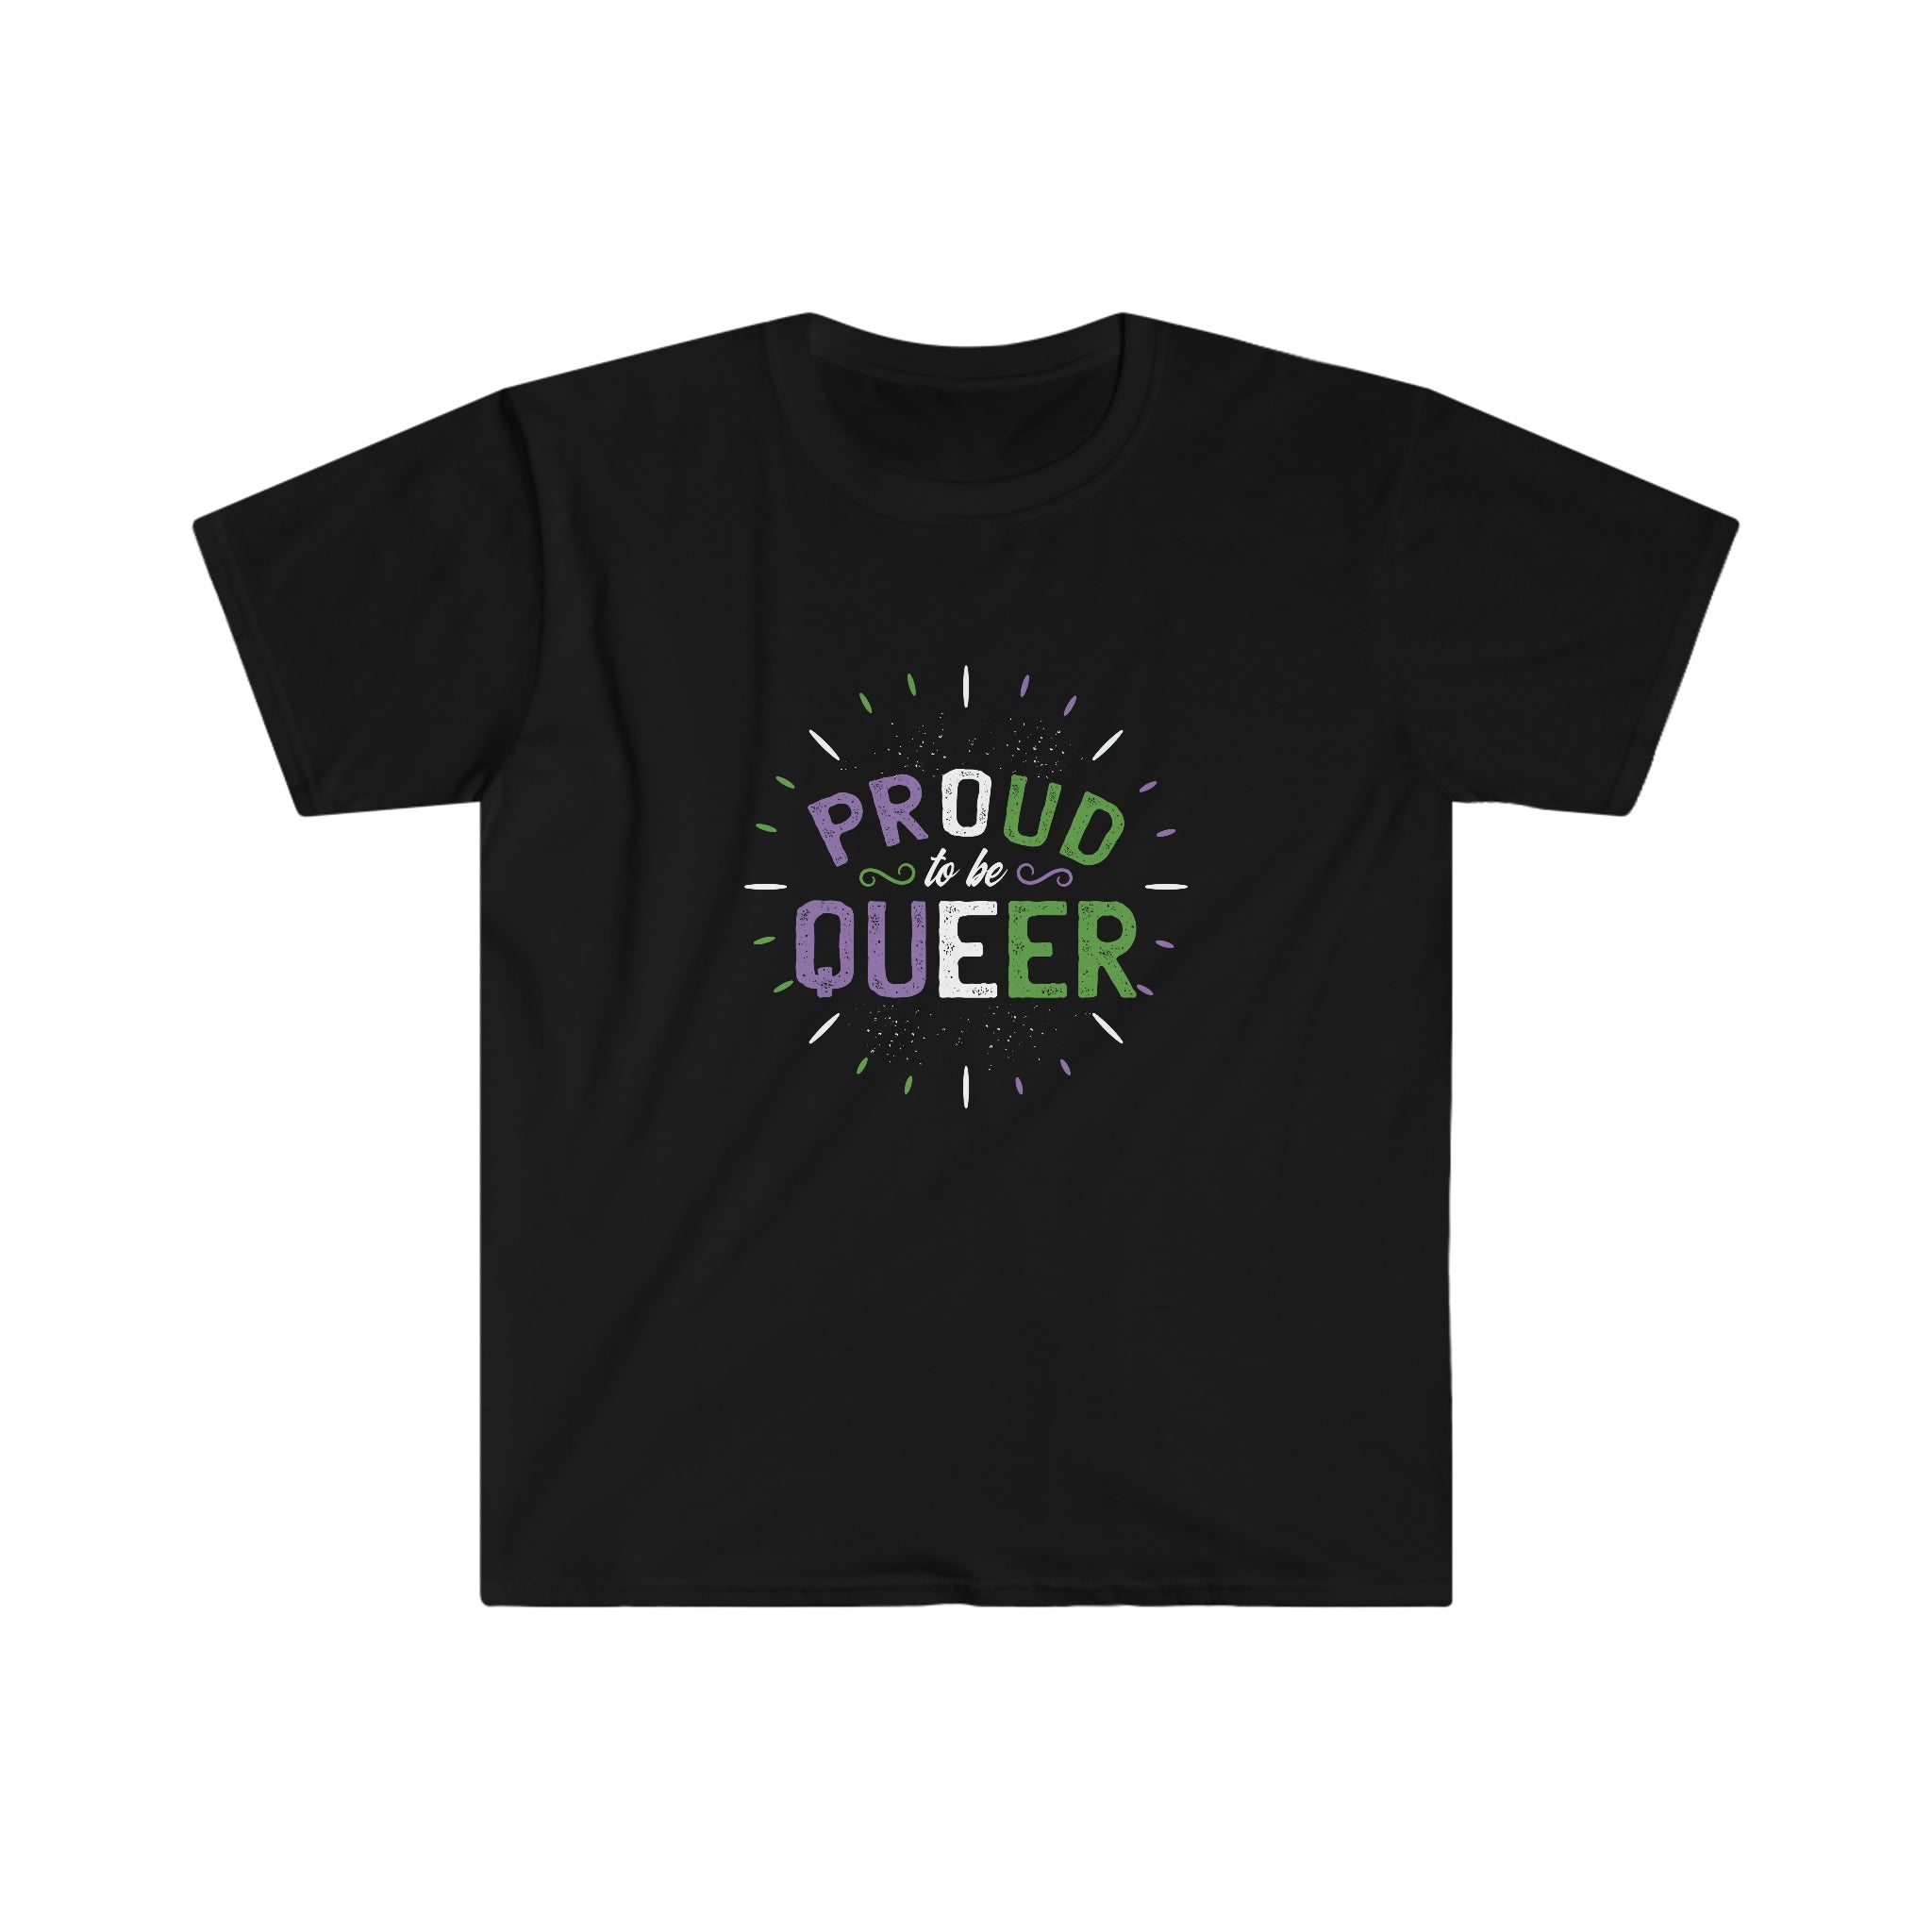 Express your pride with this Proud to Be Queer T-Shirt featuring bold purple and green lettering that reads "proud queer.